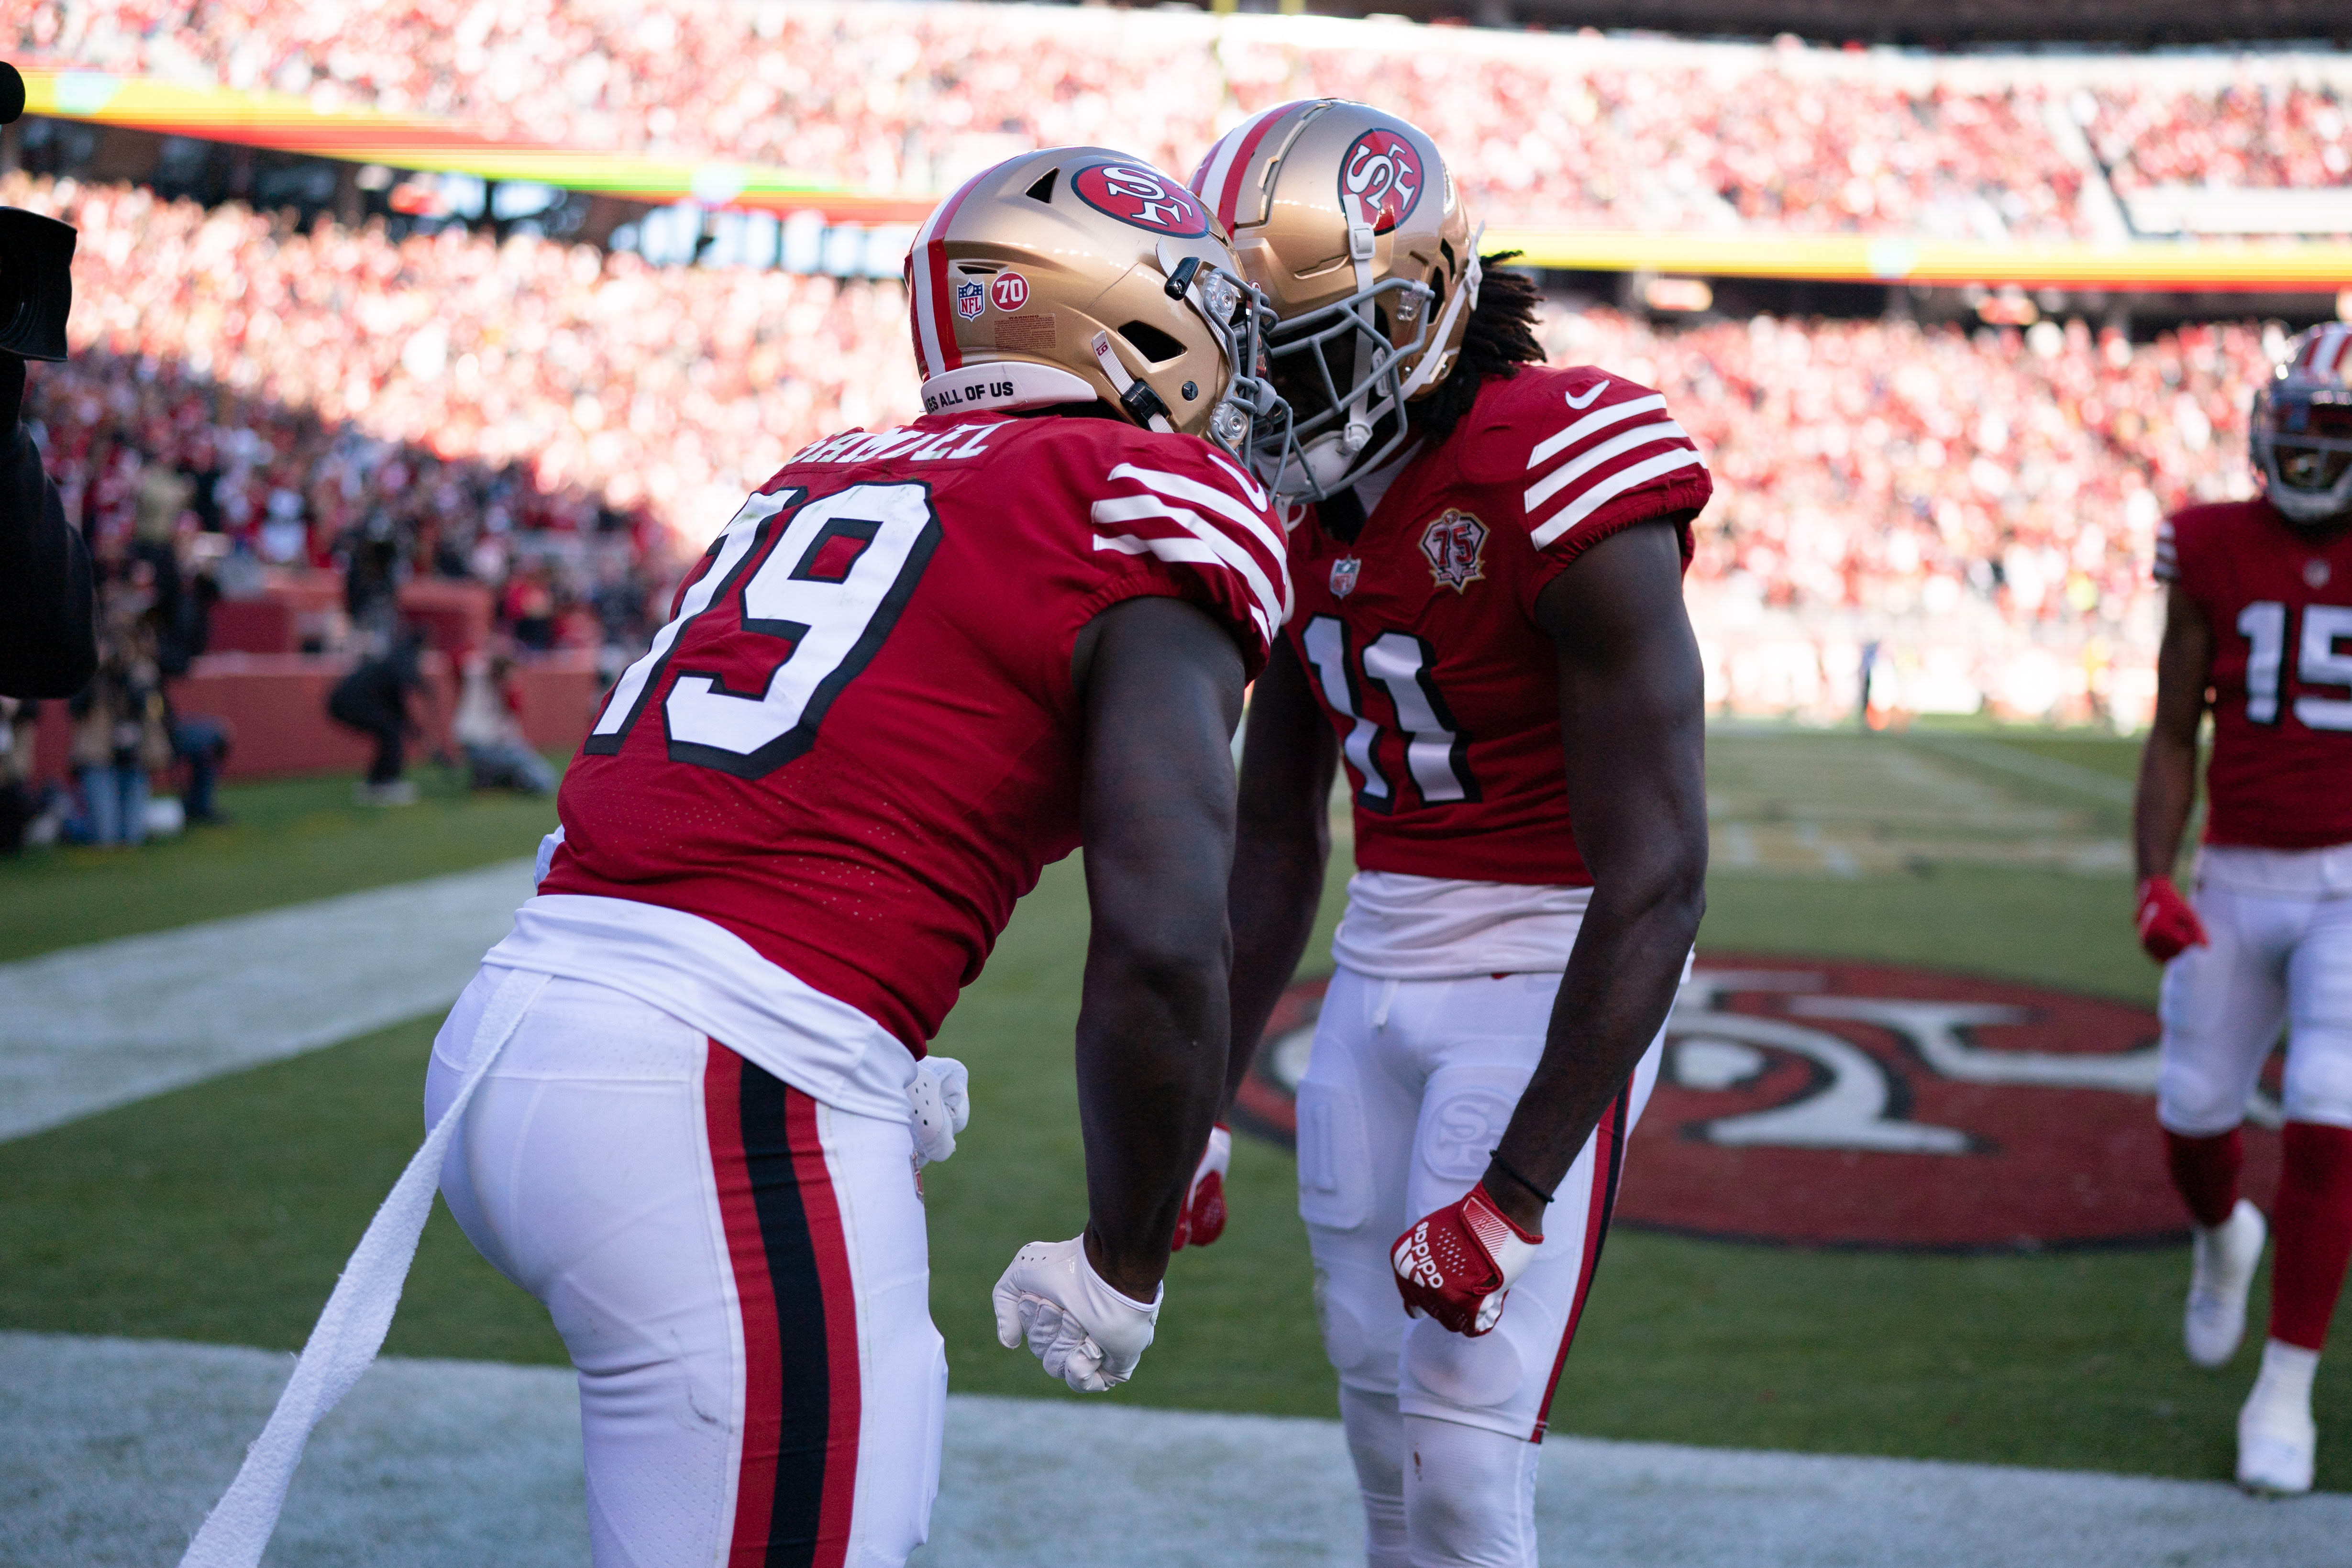 49ers now own top-5 receiving corps in PFF rankings